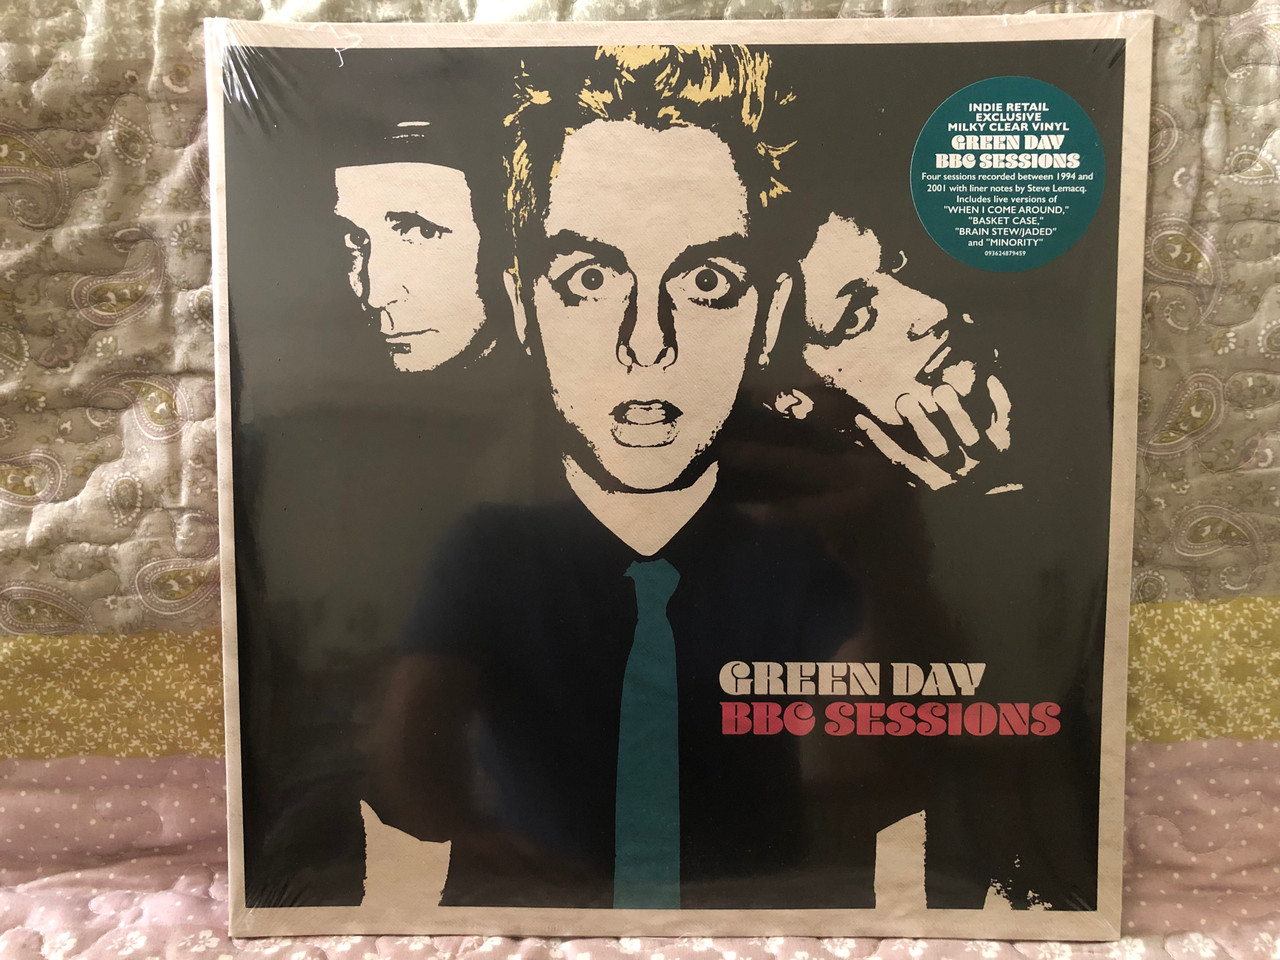 https://cdn10.bigcommerce.com/s-62bdpkt7pb/products/0/images/226787/Green_Day_BBC_Sessions_Indie_Retail_Exclusive_Milky_Clear_Vinyl_-_Green_Day_-_BBC_Sessions._Four_sessions_recorded_between_1994_and_2001_with_liner_notes_by_Steve_Lemacq._Reprise_Records_2_1__49372.1652071565.1280.1280.JPG?c=2&_gl=1*kx4kgc*_ga*MjA2NTIxMjE2MC4xNTkwNTEyNTMy*_ga_WS2VZYPC6G*MTY1MjA3MDA3MS4zODcuMS4xNjUyMDcxMzEwLjQz